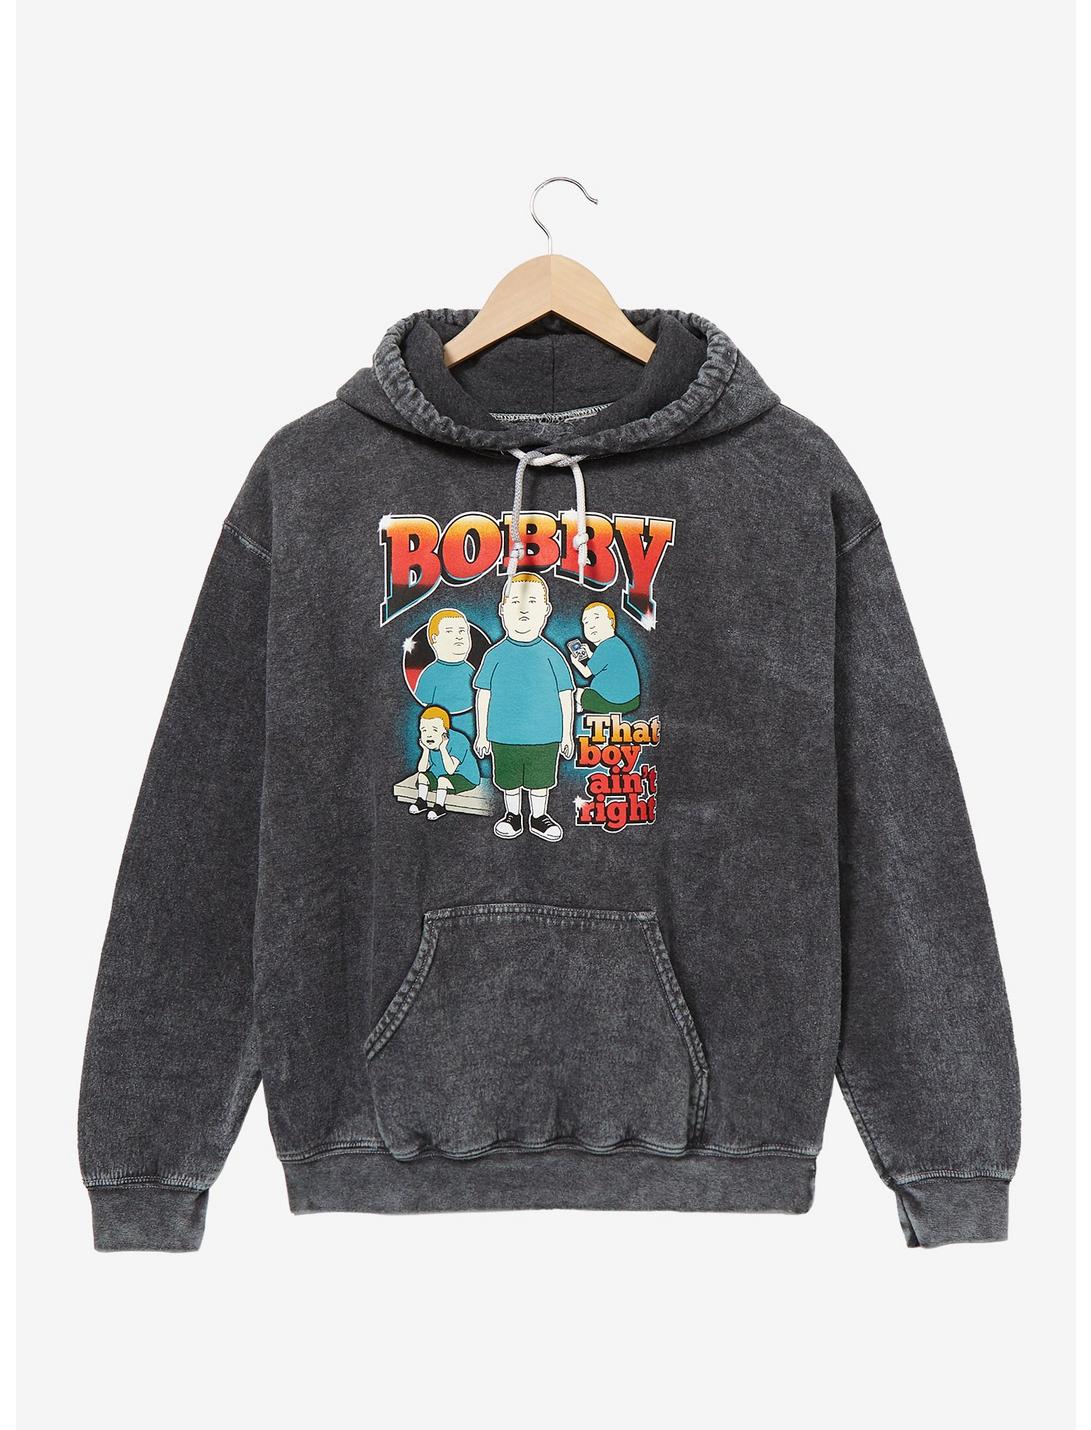 King of the Hill Bobby Hill Retro Hoodie - BoxLunch Exclusive, BLACK MINERAL WASH, hi-res